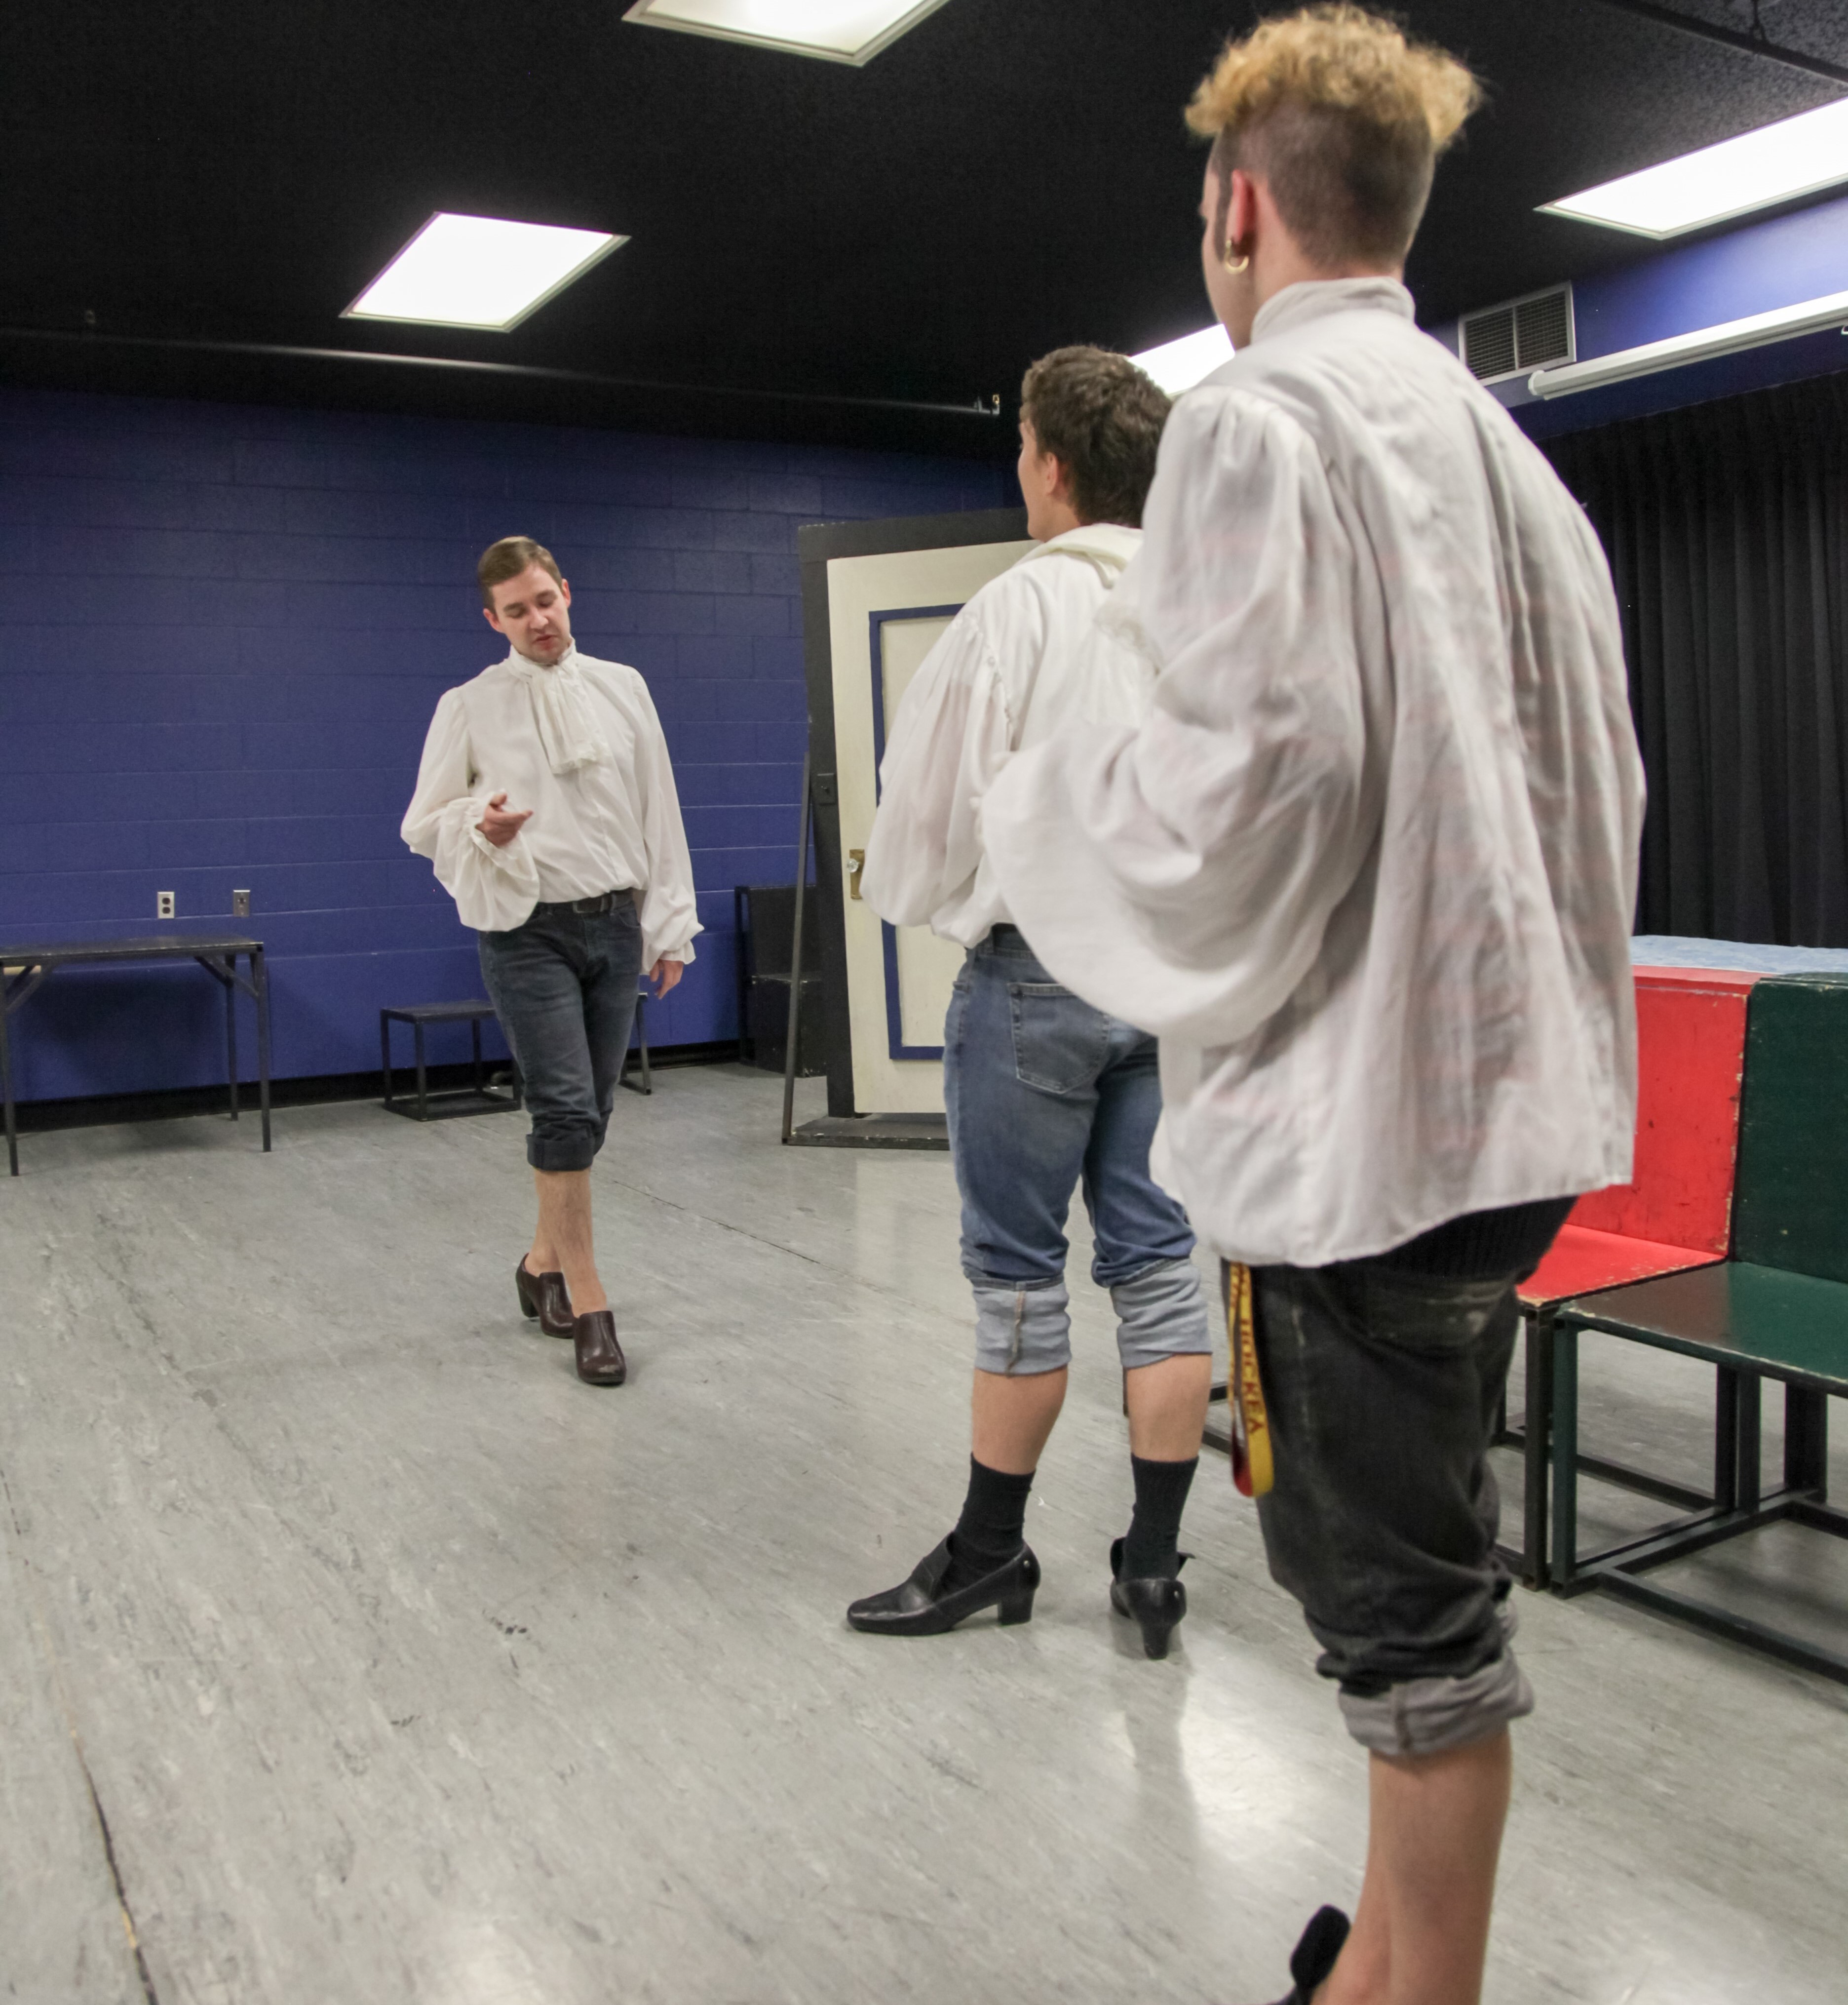 Student actors in period style shirts and shoes in class